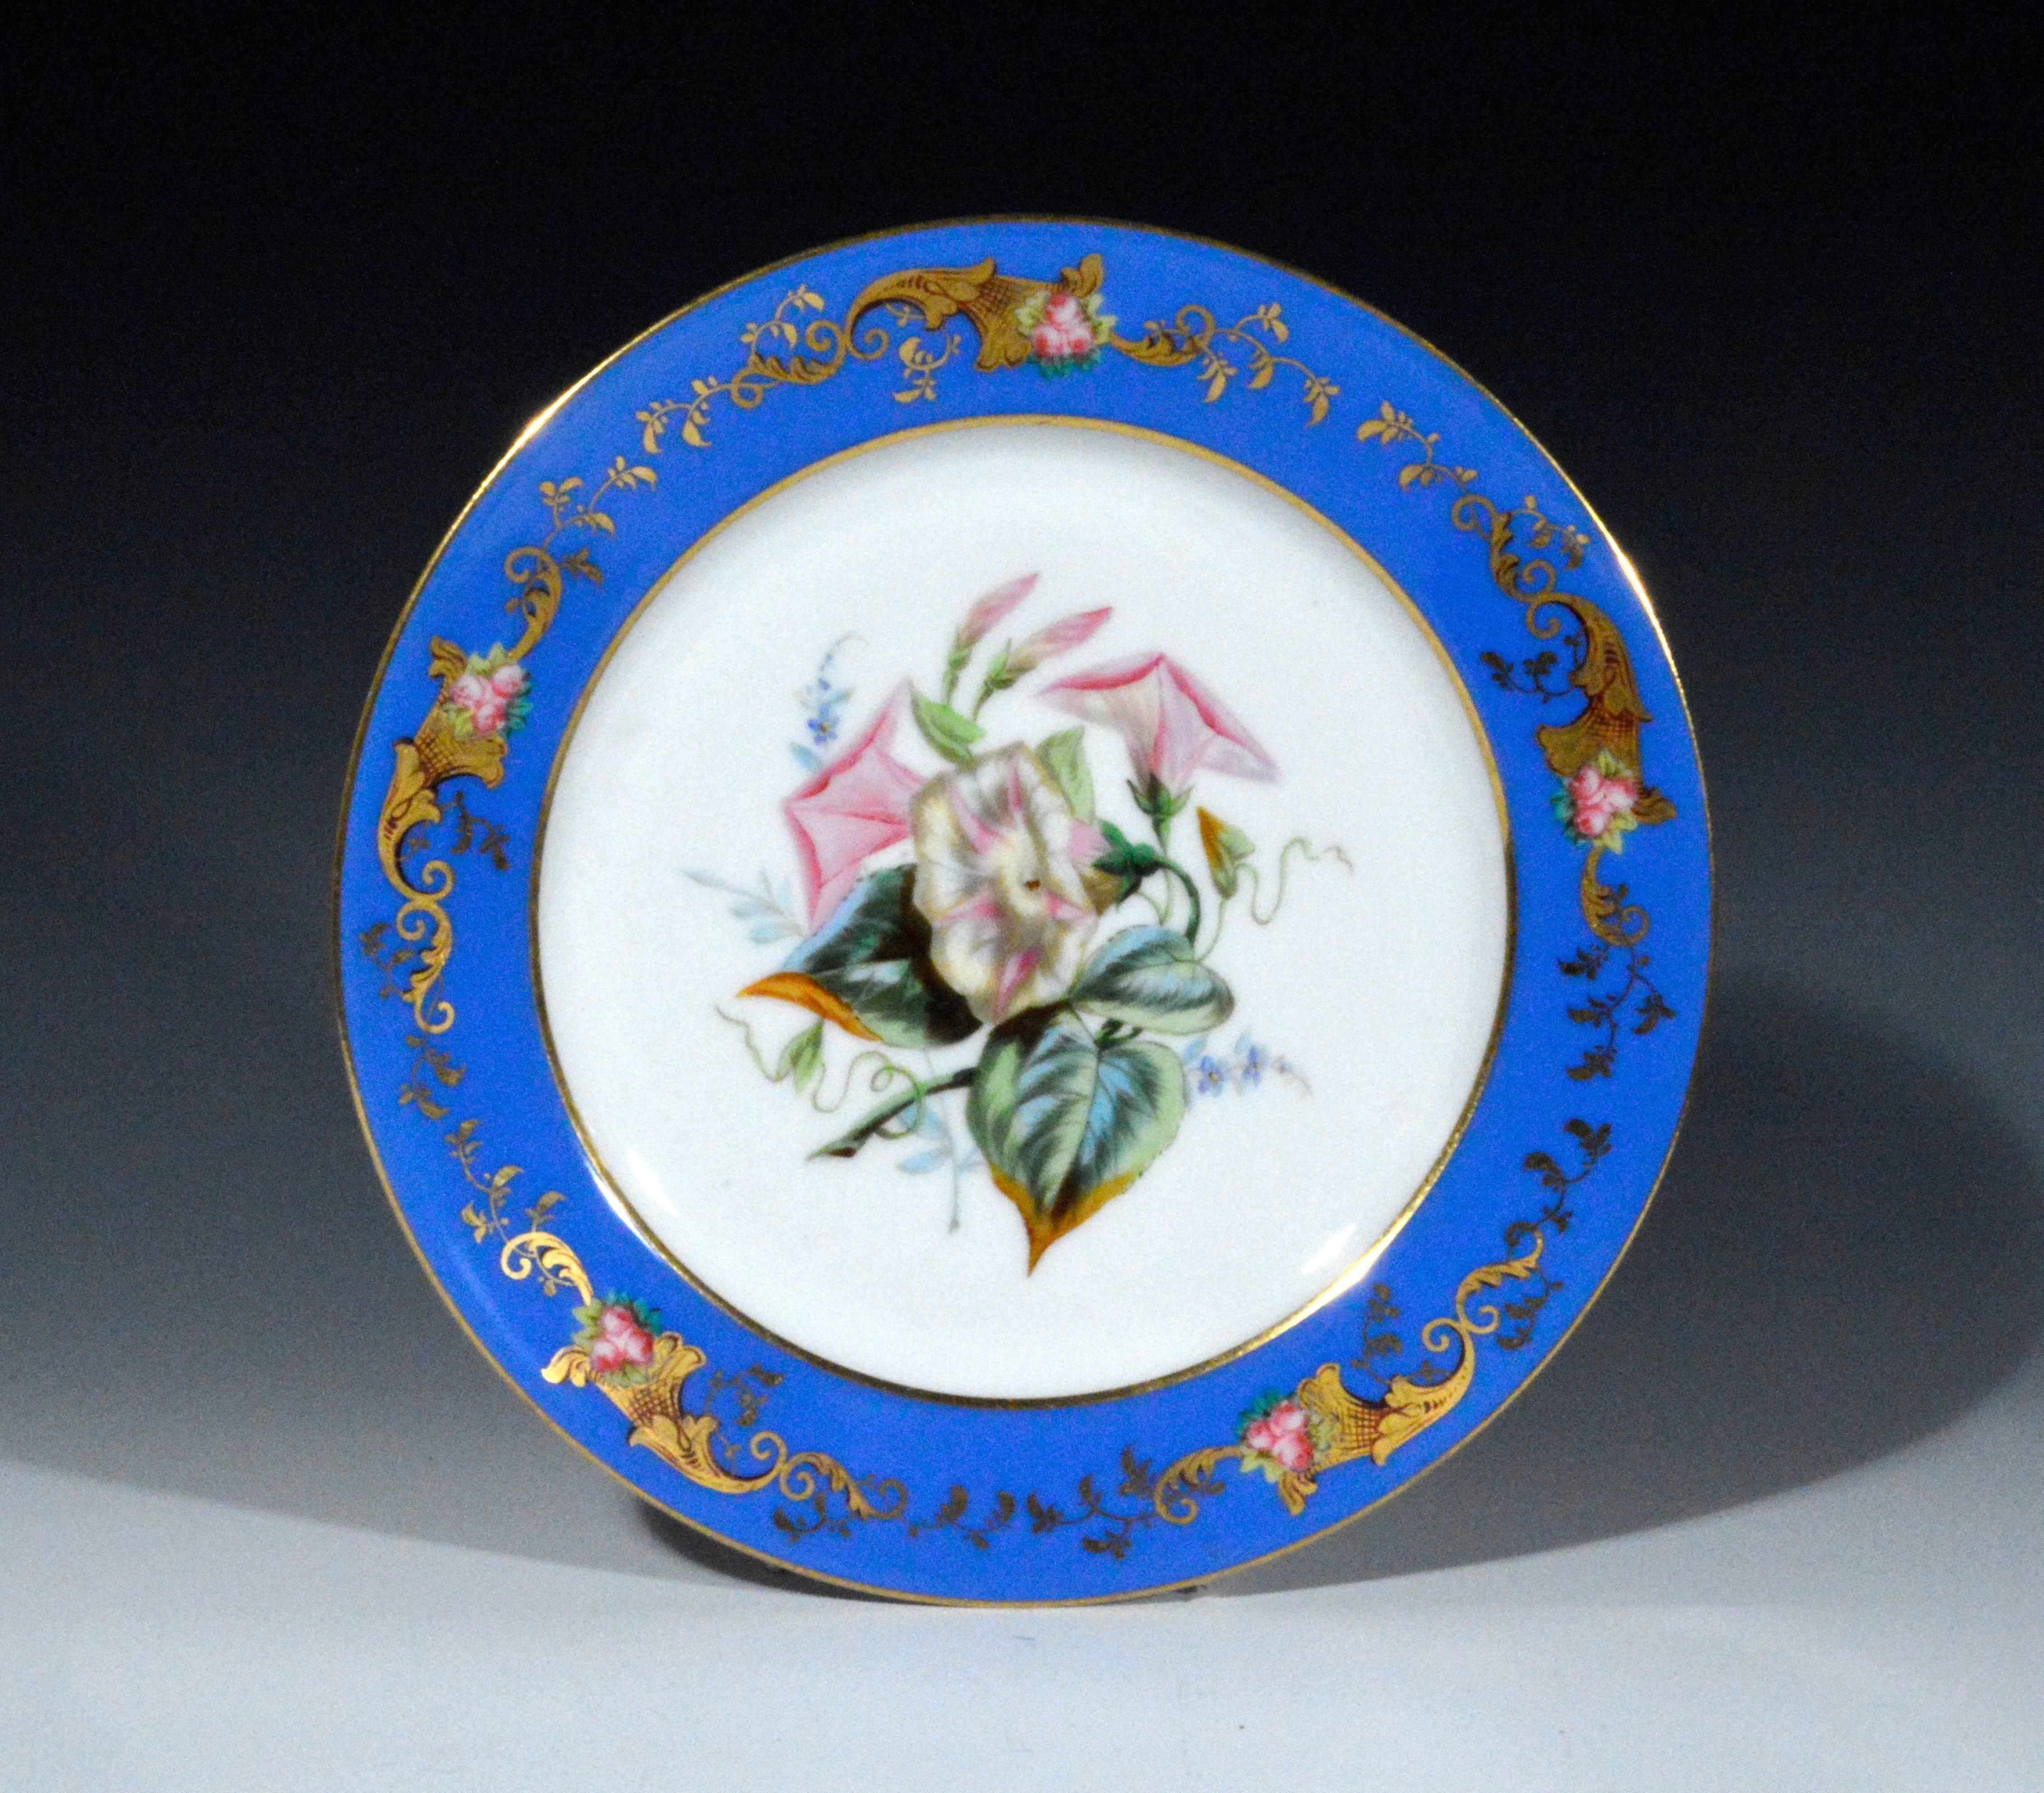 Paris porcelain botanical and fruit-decorated plates, circa 1850.

The six plates have three botanical and three fruit designs in the center well with a light blue ground rim overlaid with a small floral swag.

